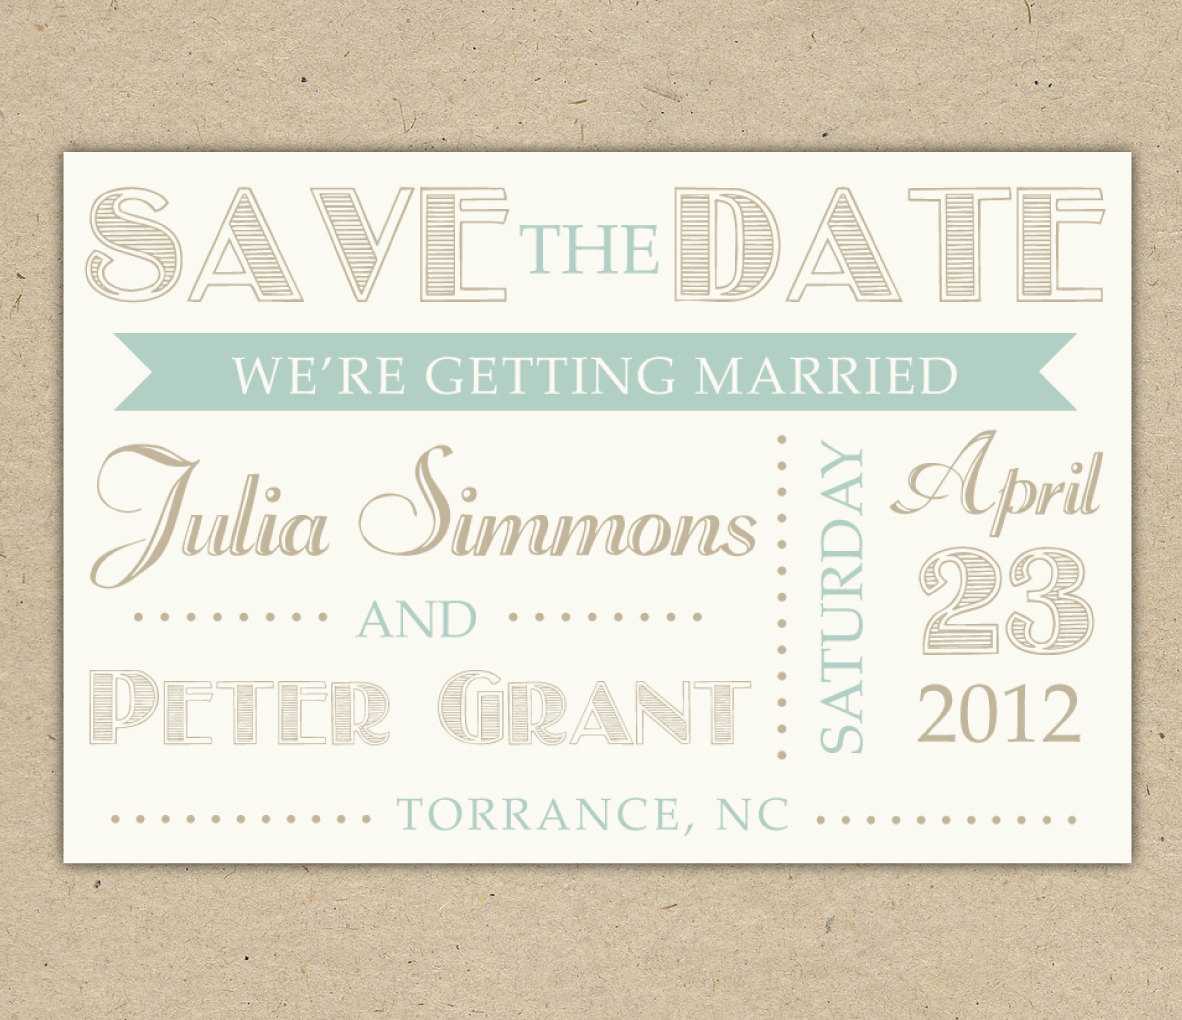 Save The Date Cards Templates For Weddings Regarding Free Save The Date Postcard Templates